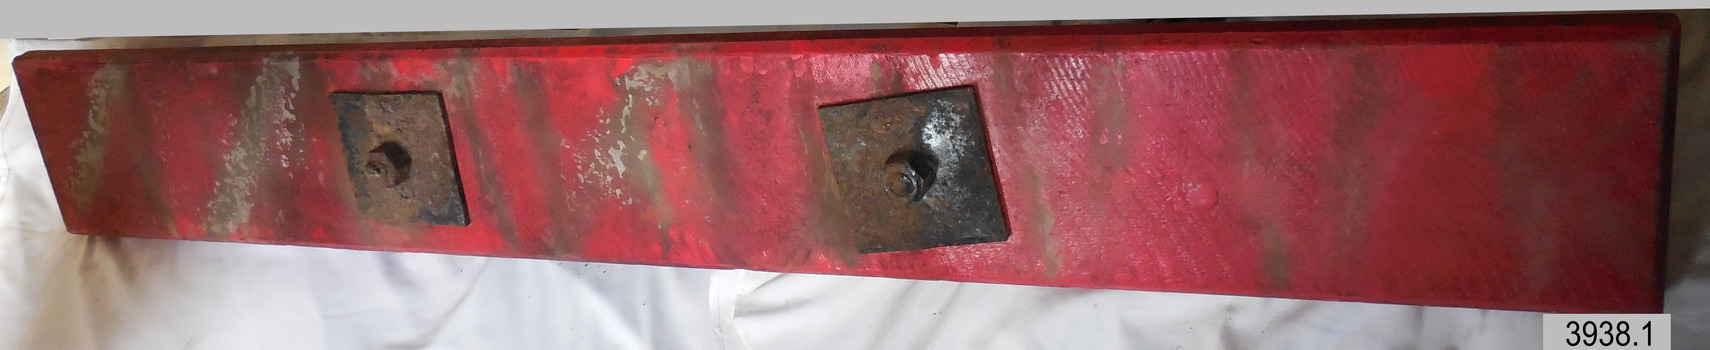 The square metal plates are bolted through the anchor' plank to the underside.